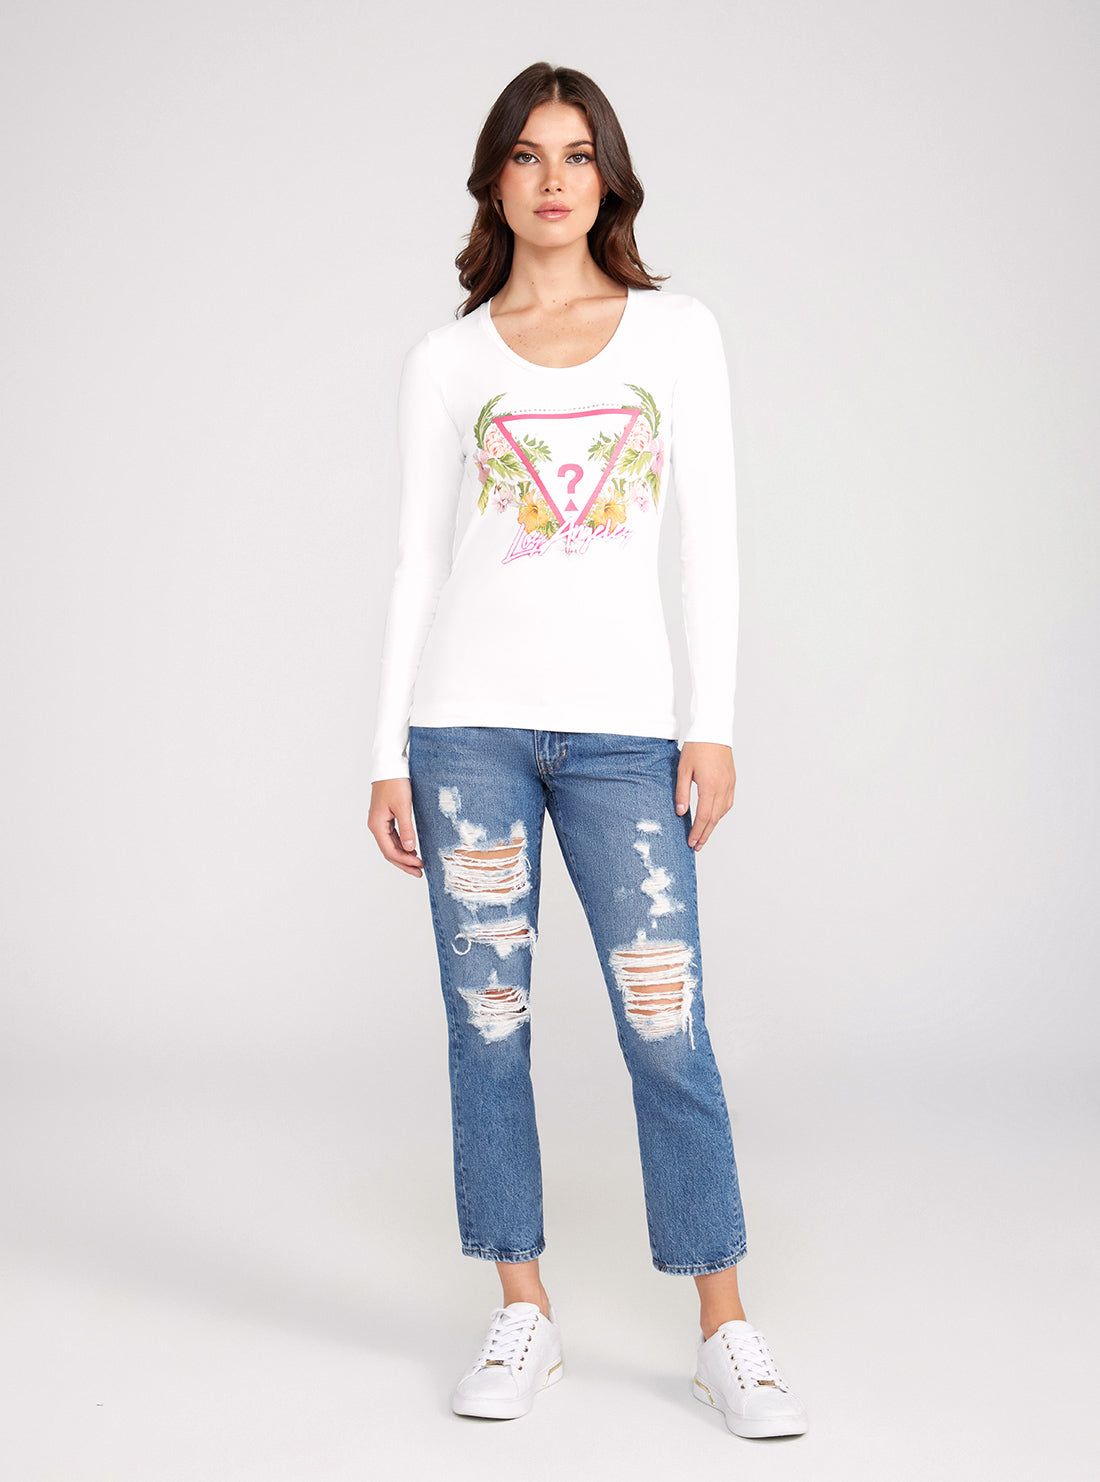 GUESS White Long Sleeve Triangle Flowers T-Shirt full view